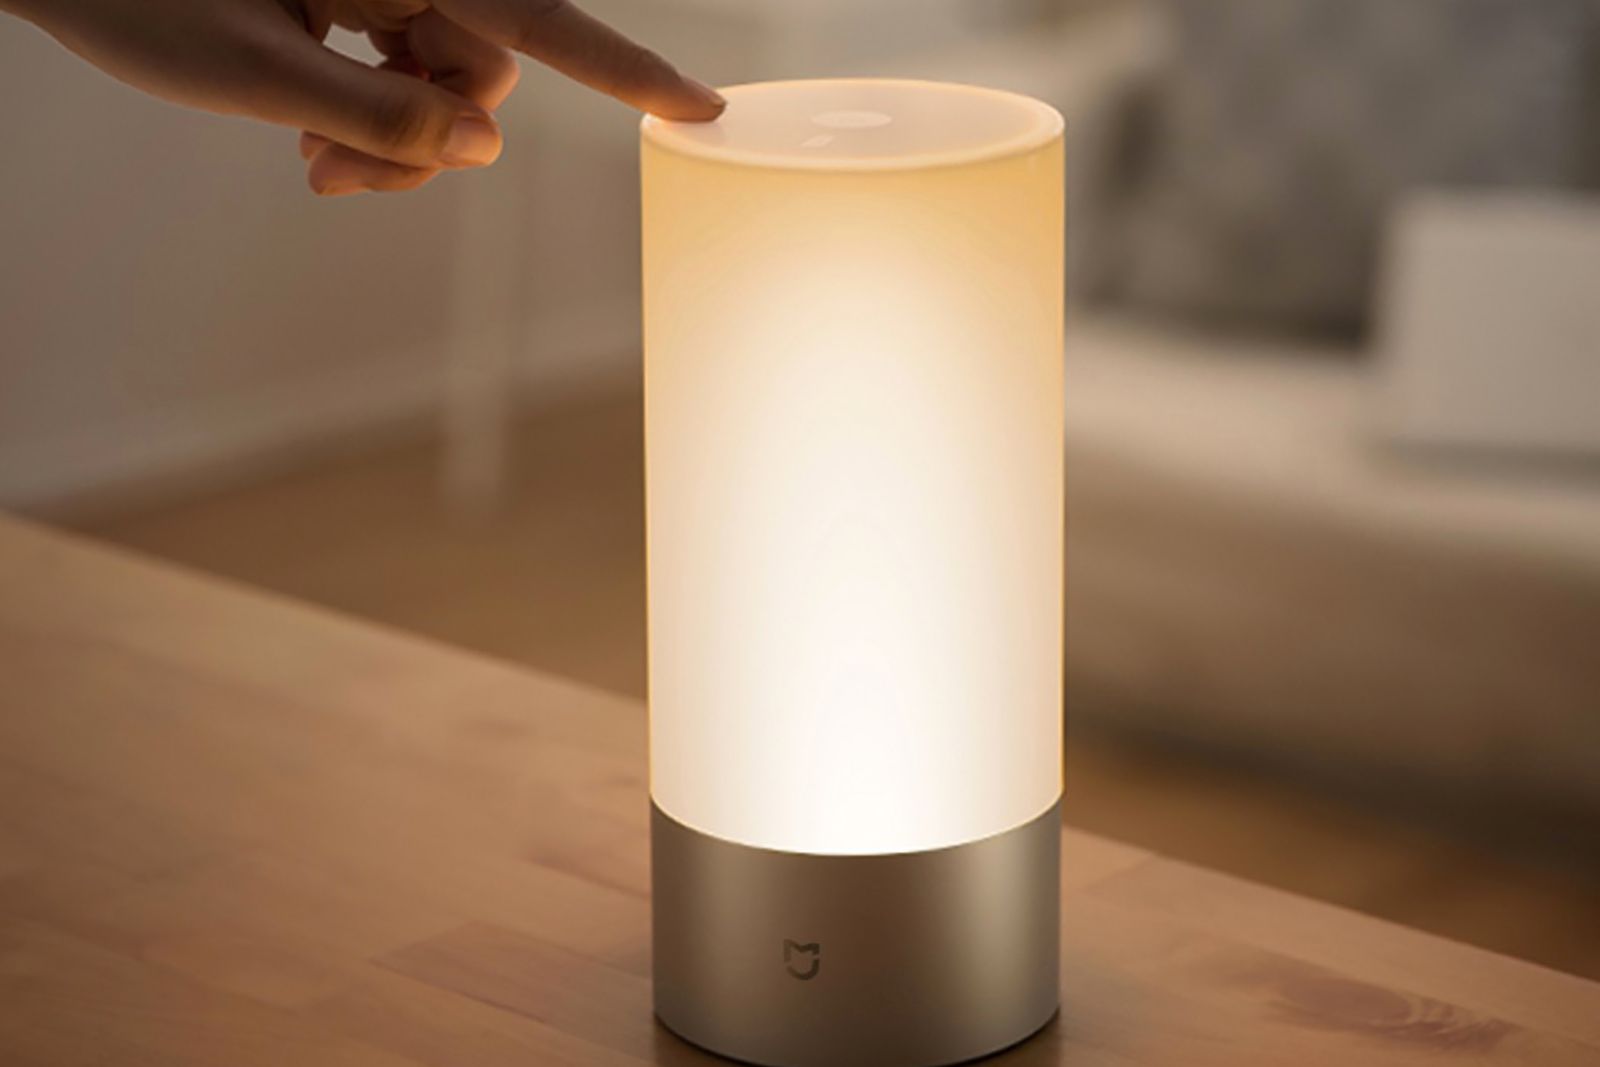 Xiaomi launches five new smart home devices in US at Walmart image 1